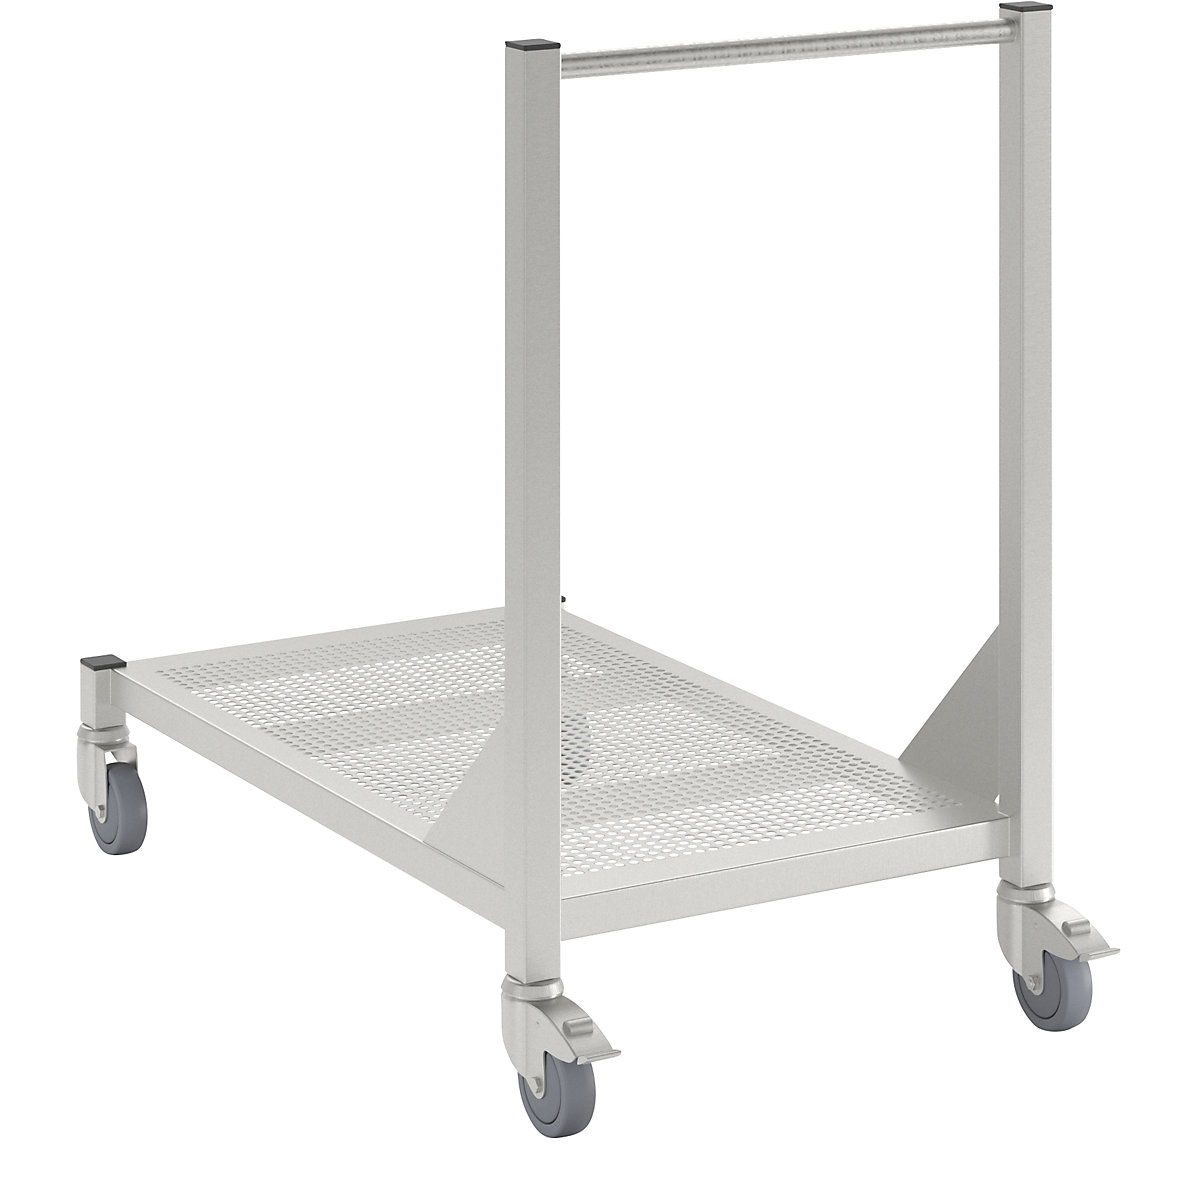 Mobile cleanroom table, made of stainless steel, 1 level, length 1000 mm-13